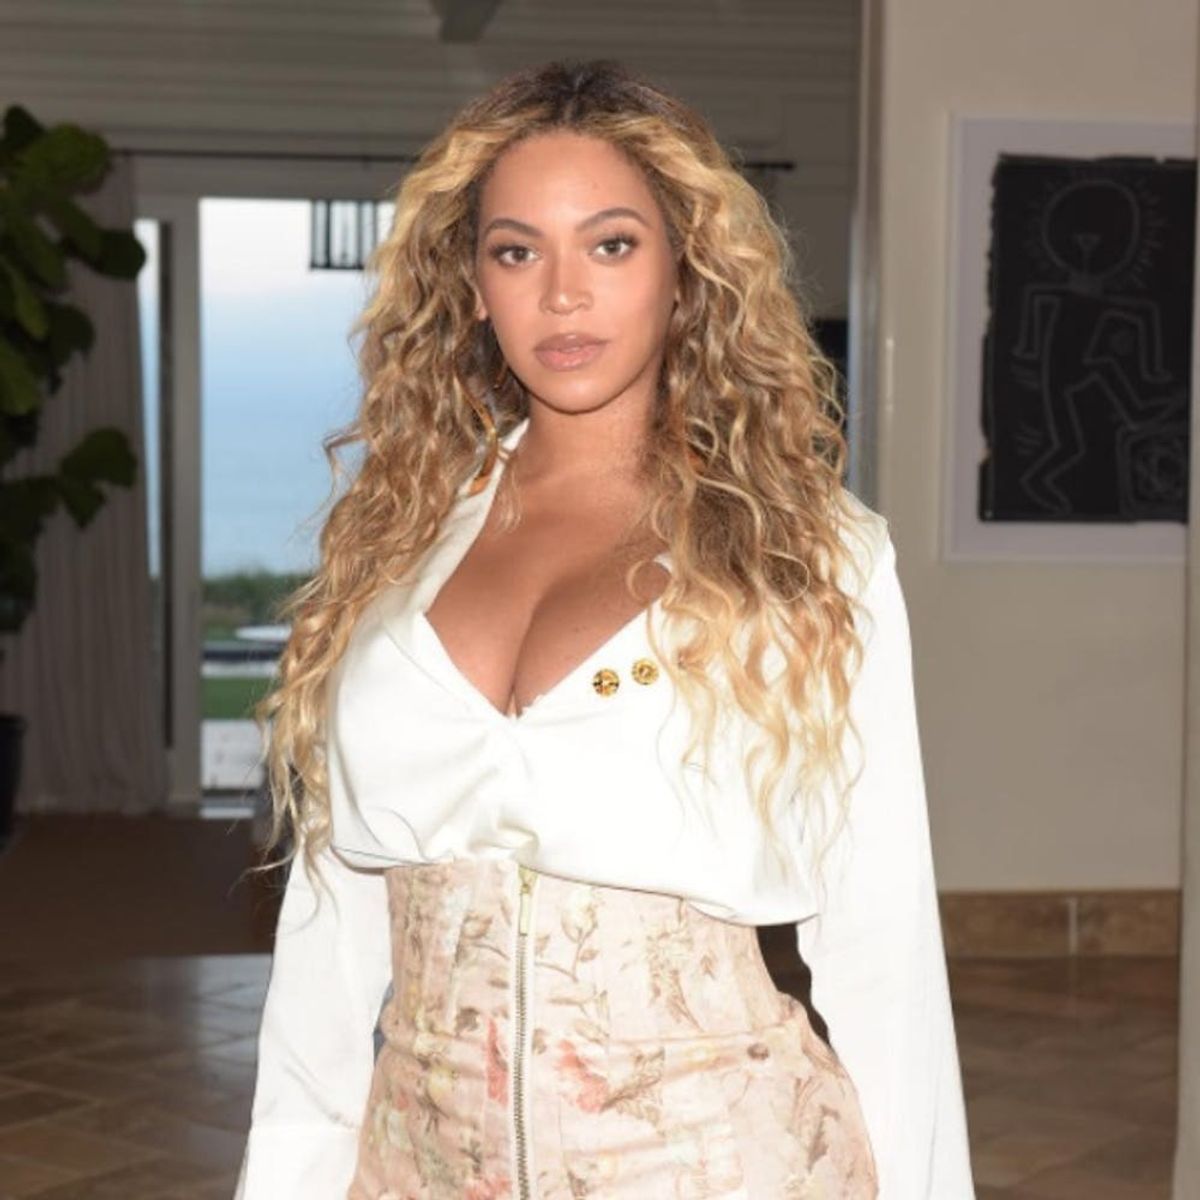 Beyoncé Shares a Glimpse of Her Date Night With JAY-Z Hours After Debuting the Twins